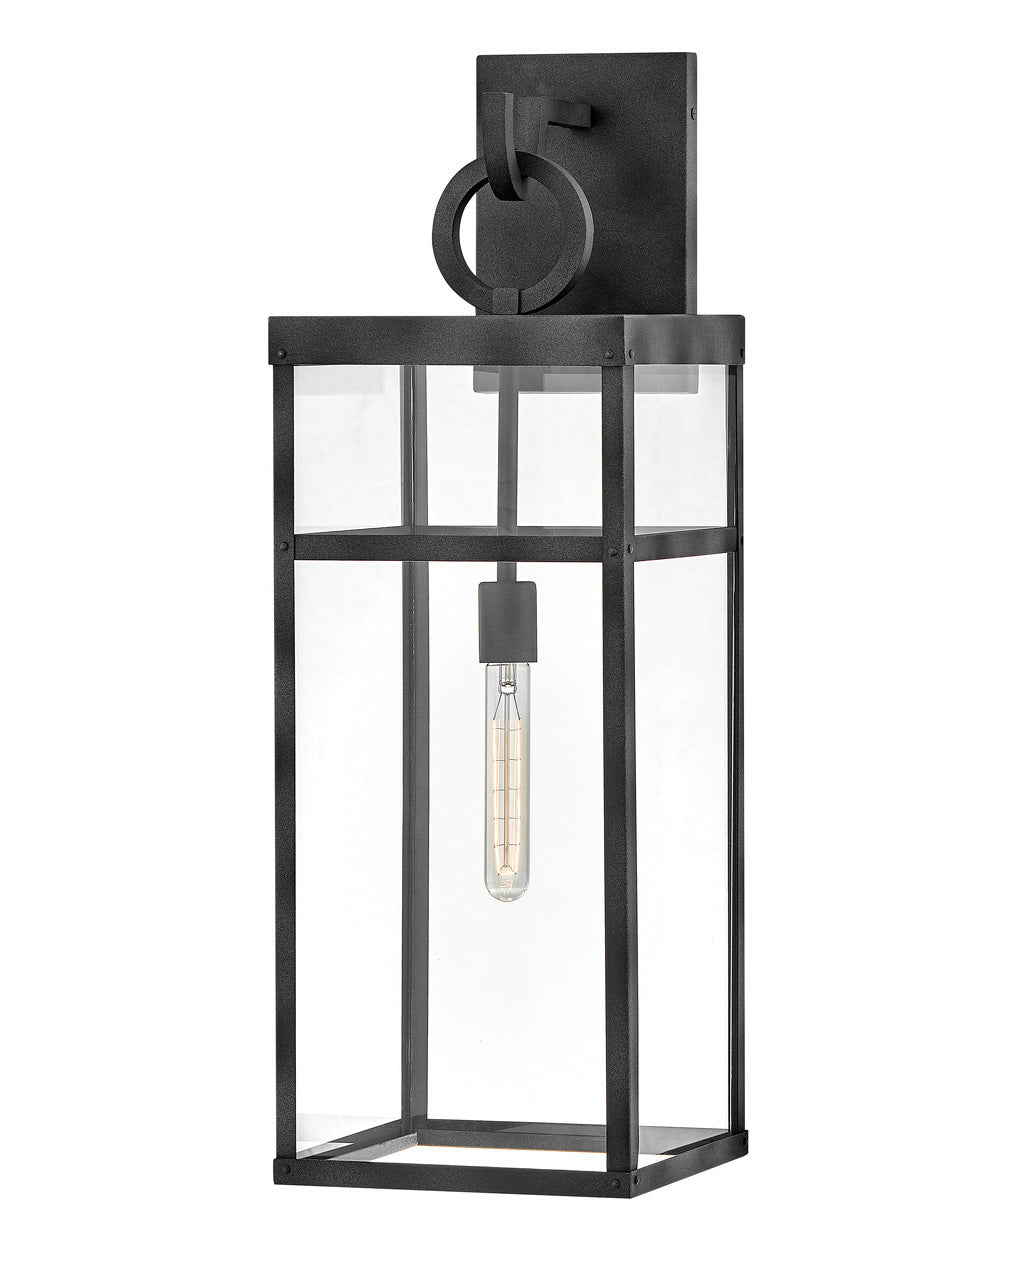 PORTER-Extra Large Wall Mount Lantern Outdoor l Wall Hinkley   